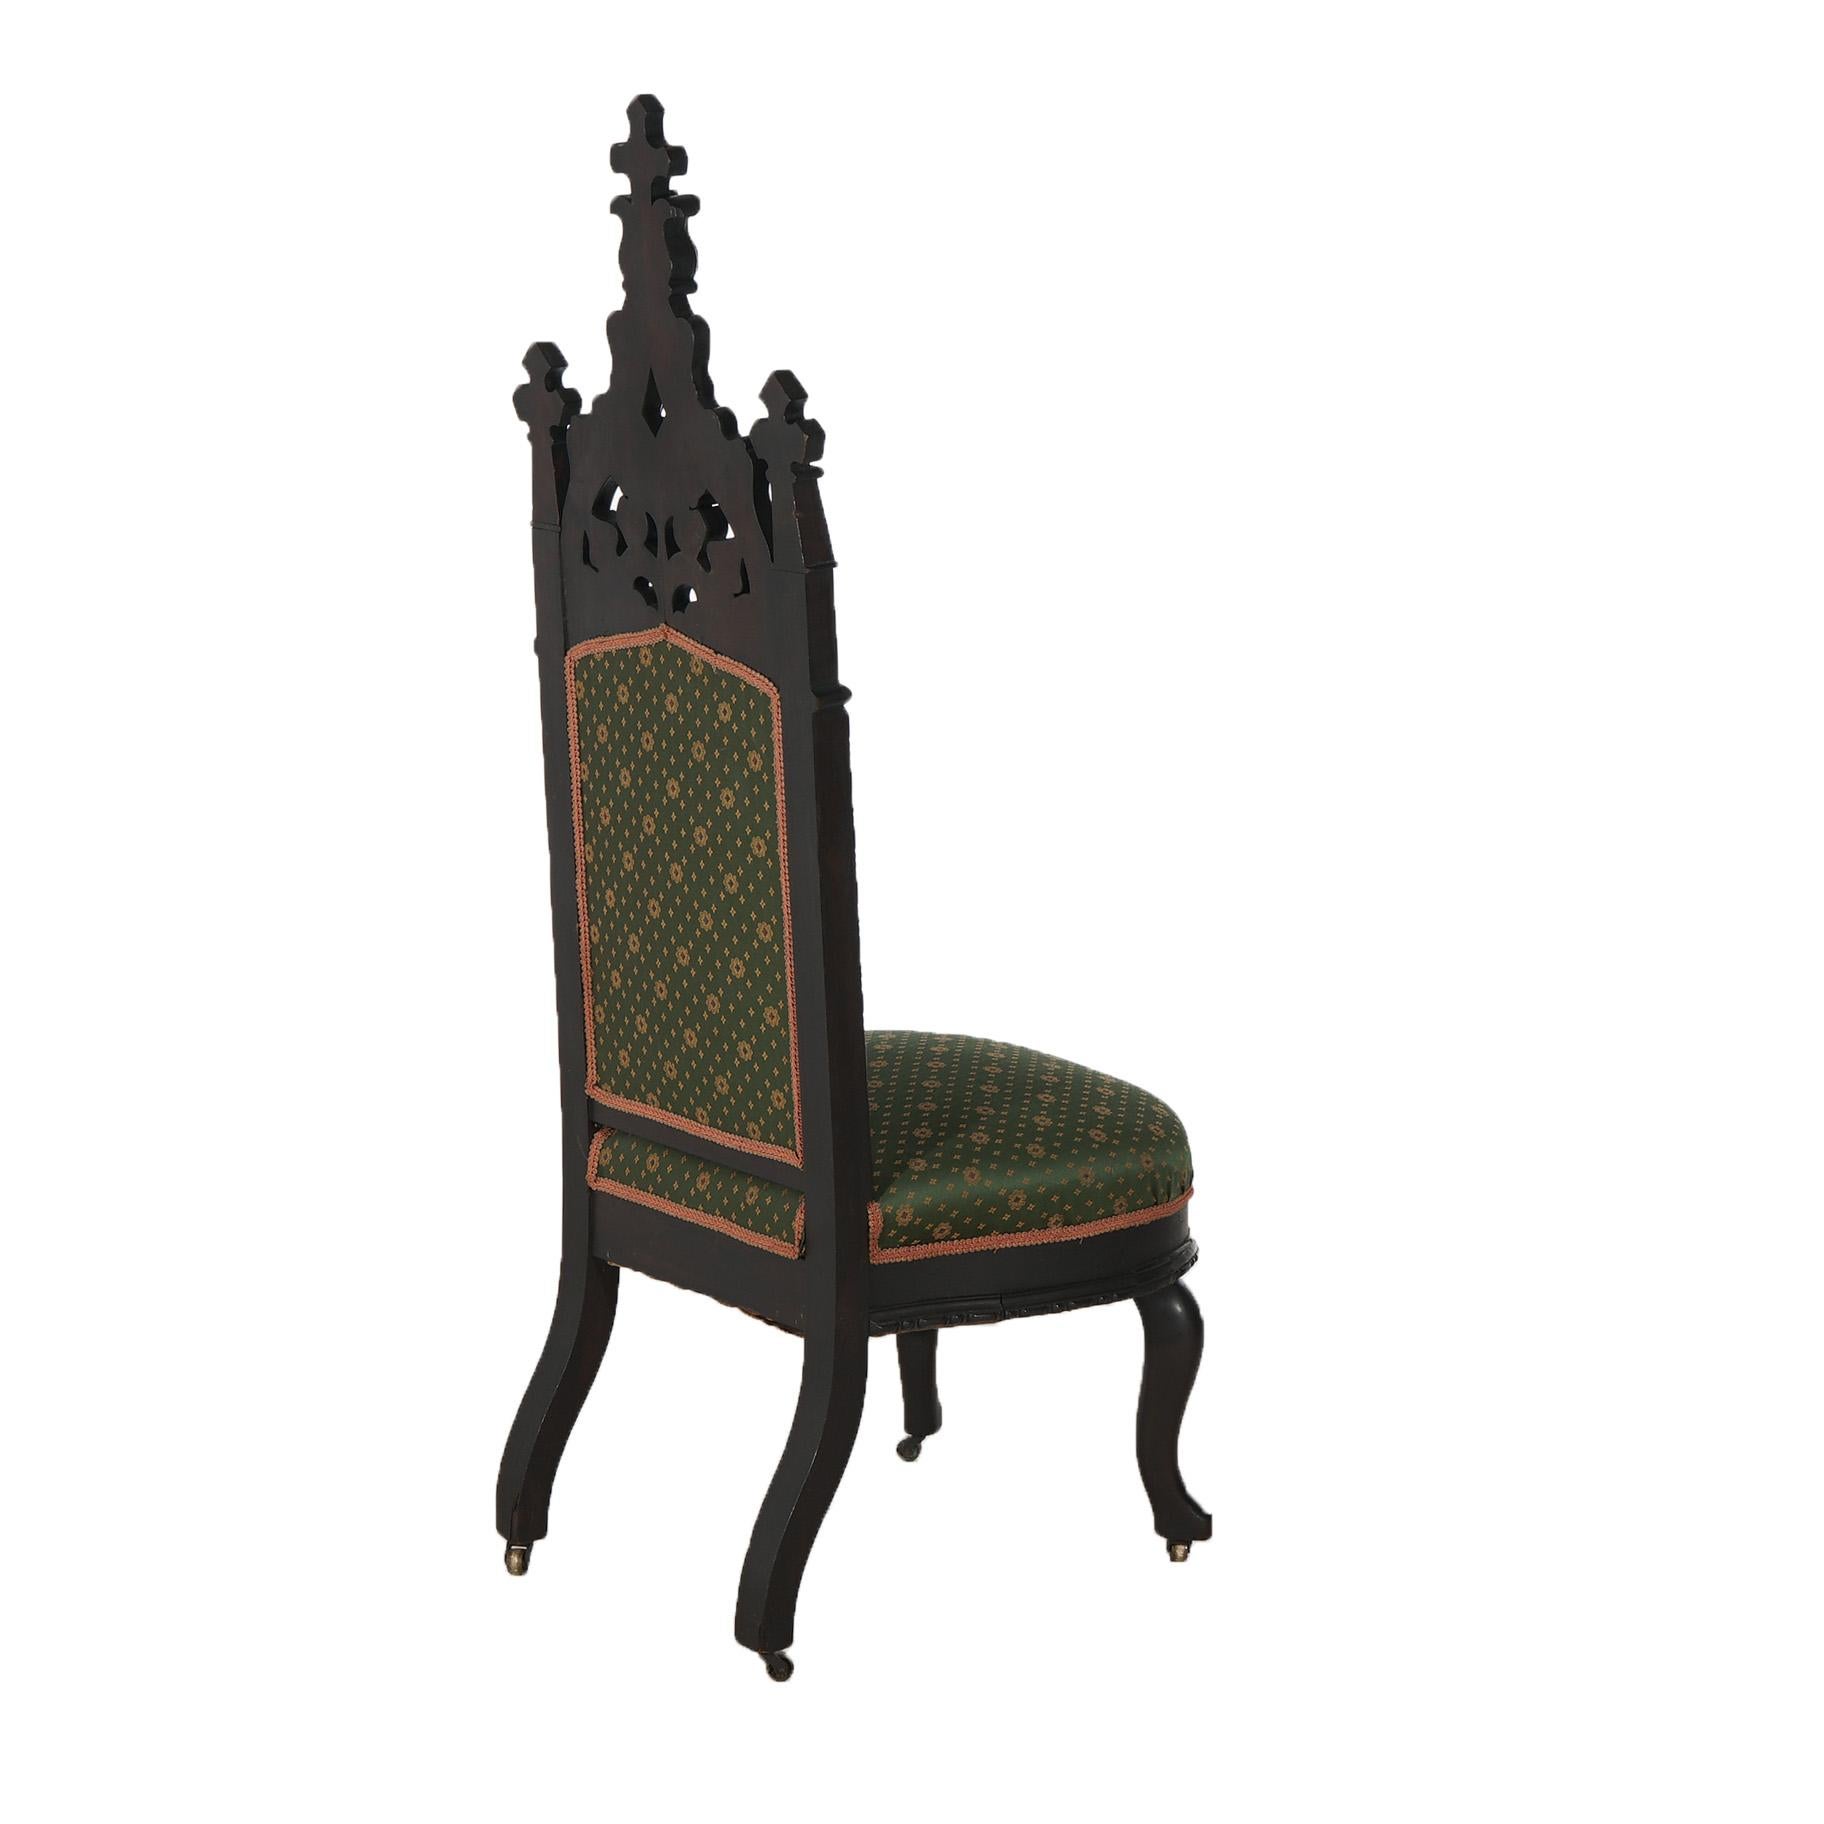 Antique Gothic Revival Ebonized & Carved Walnut Upholstered Throne Chair C1860 For Sale 3